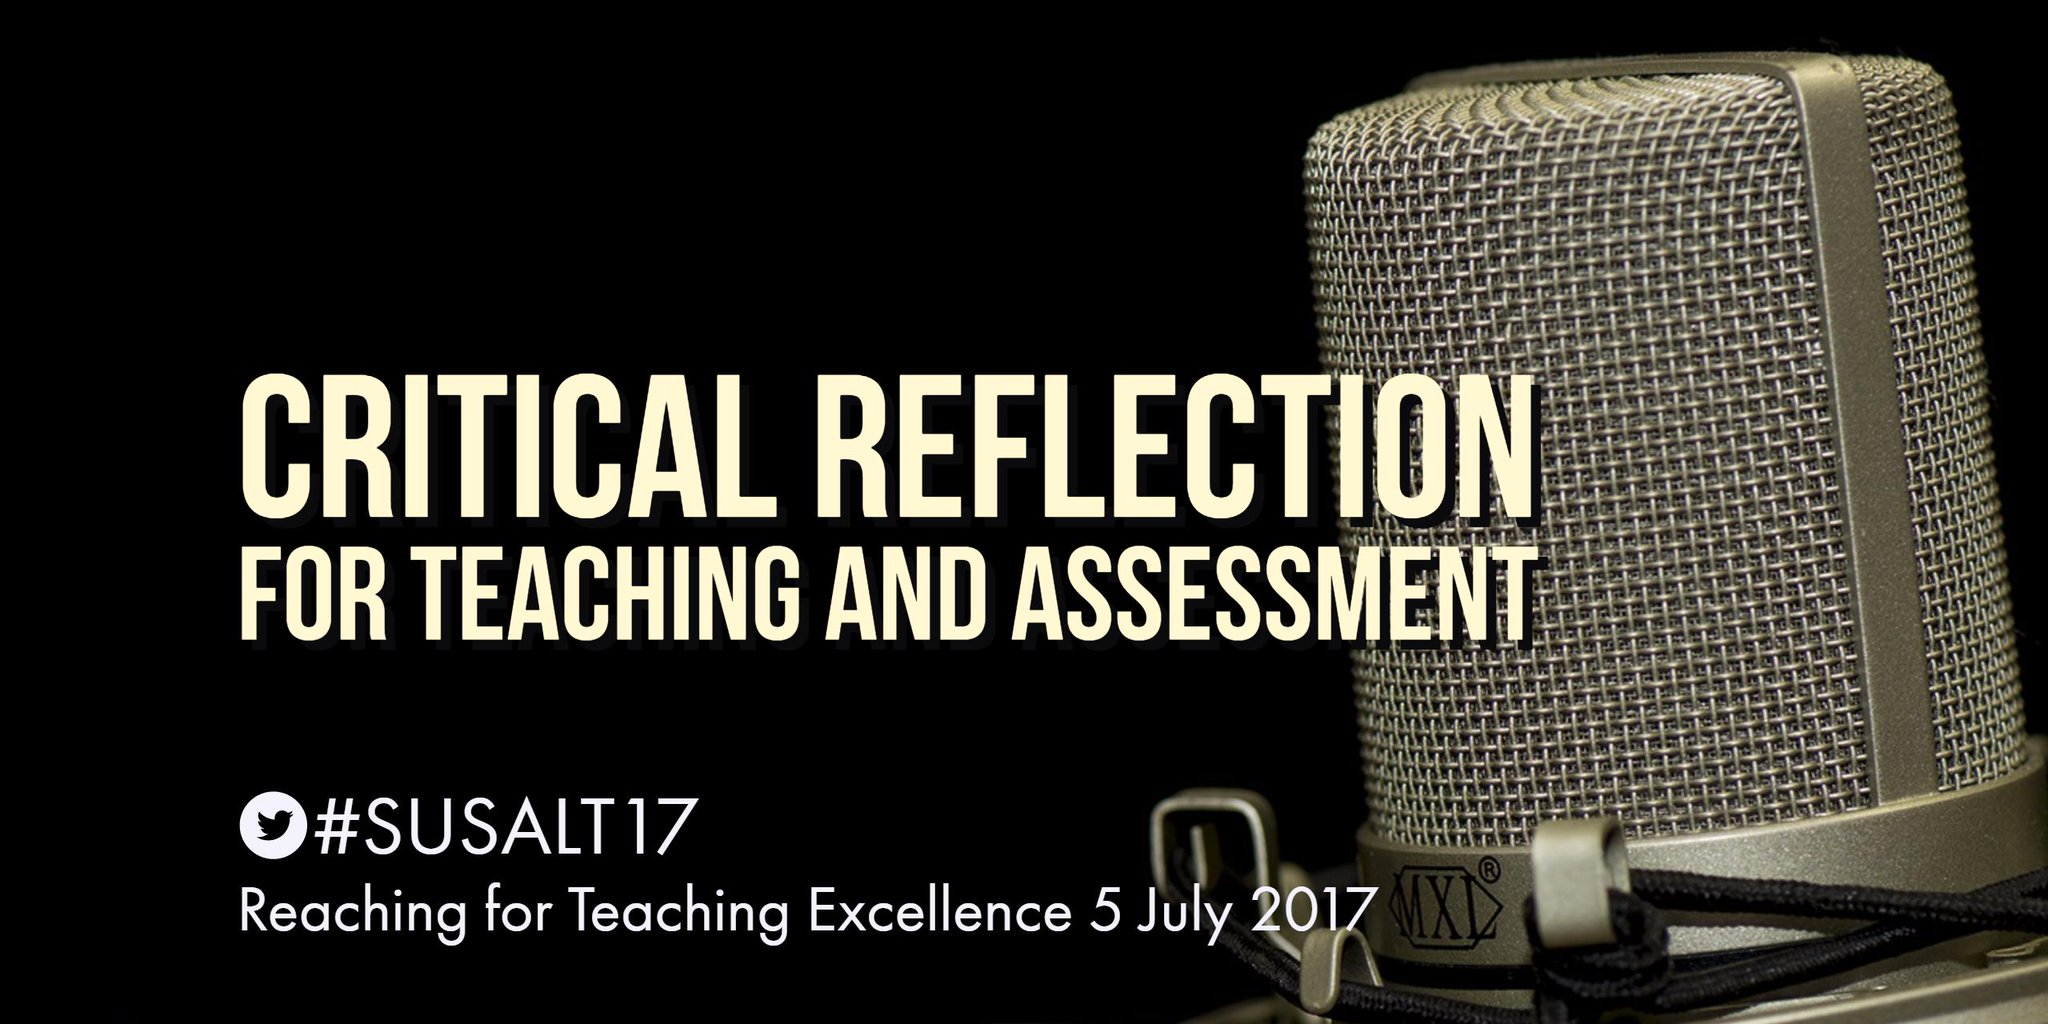 We are really looking forward to hearing from @cathgroves in her session about Critical Reflection #SUSALT17 https://t.co/xVoX6WSKas https://t.co/XgjIF8vRuo